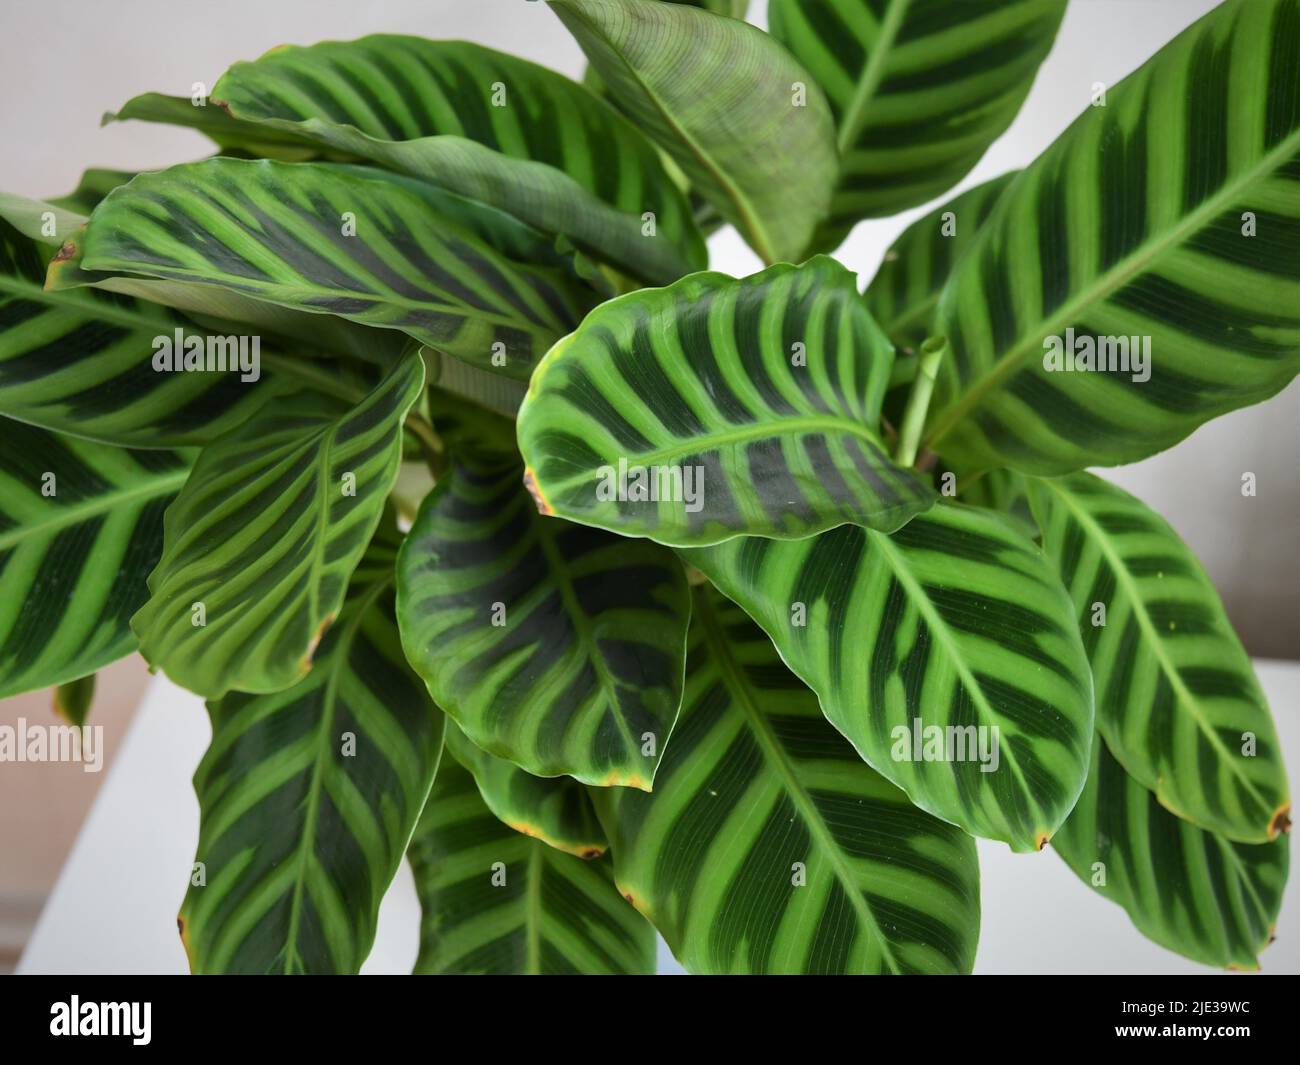 Close up of Calathea zebrina (the zebra plant) leaves. The leaves are striped with two shades of green. Plant isolated on a white background. Stock Photo